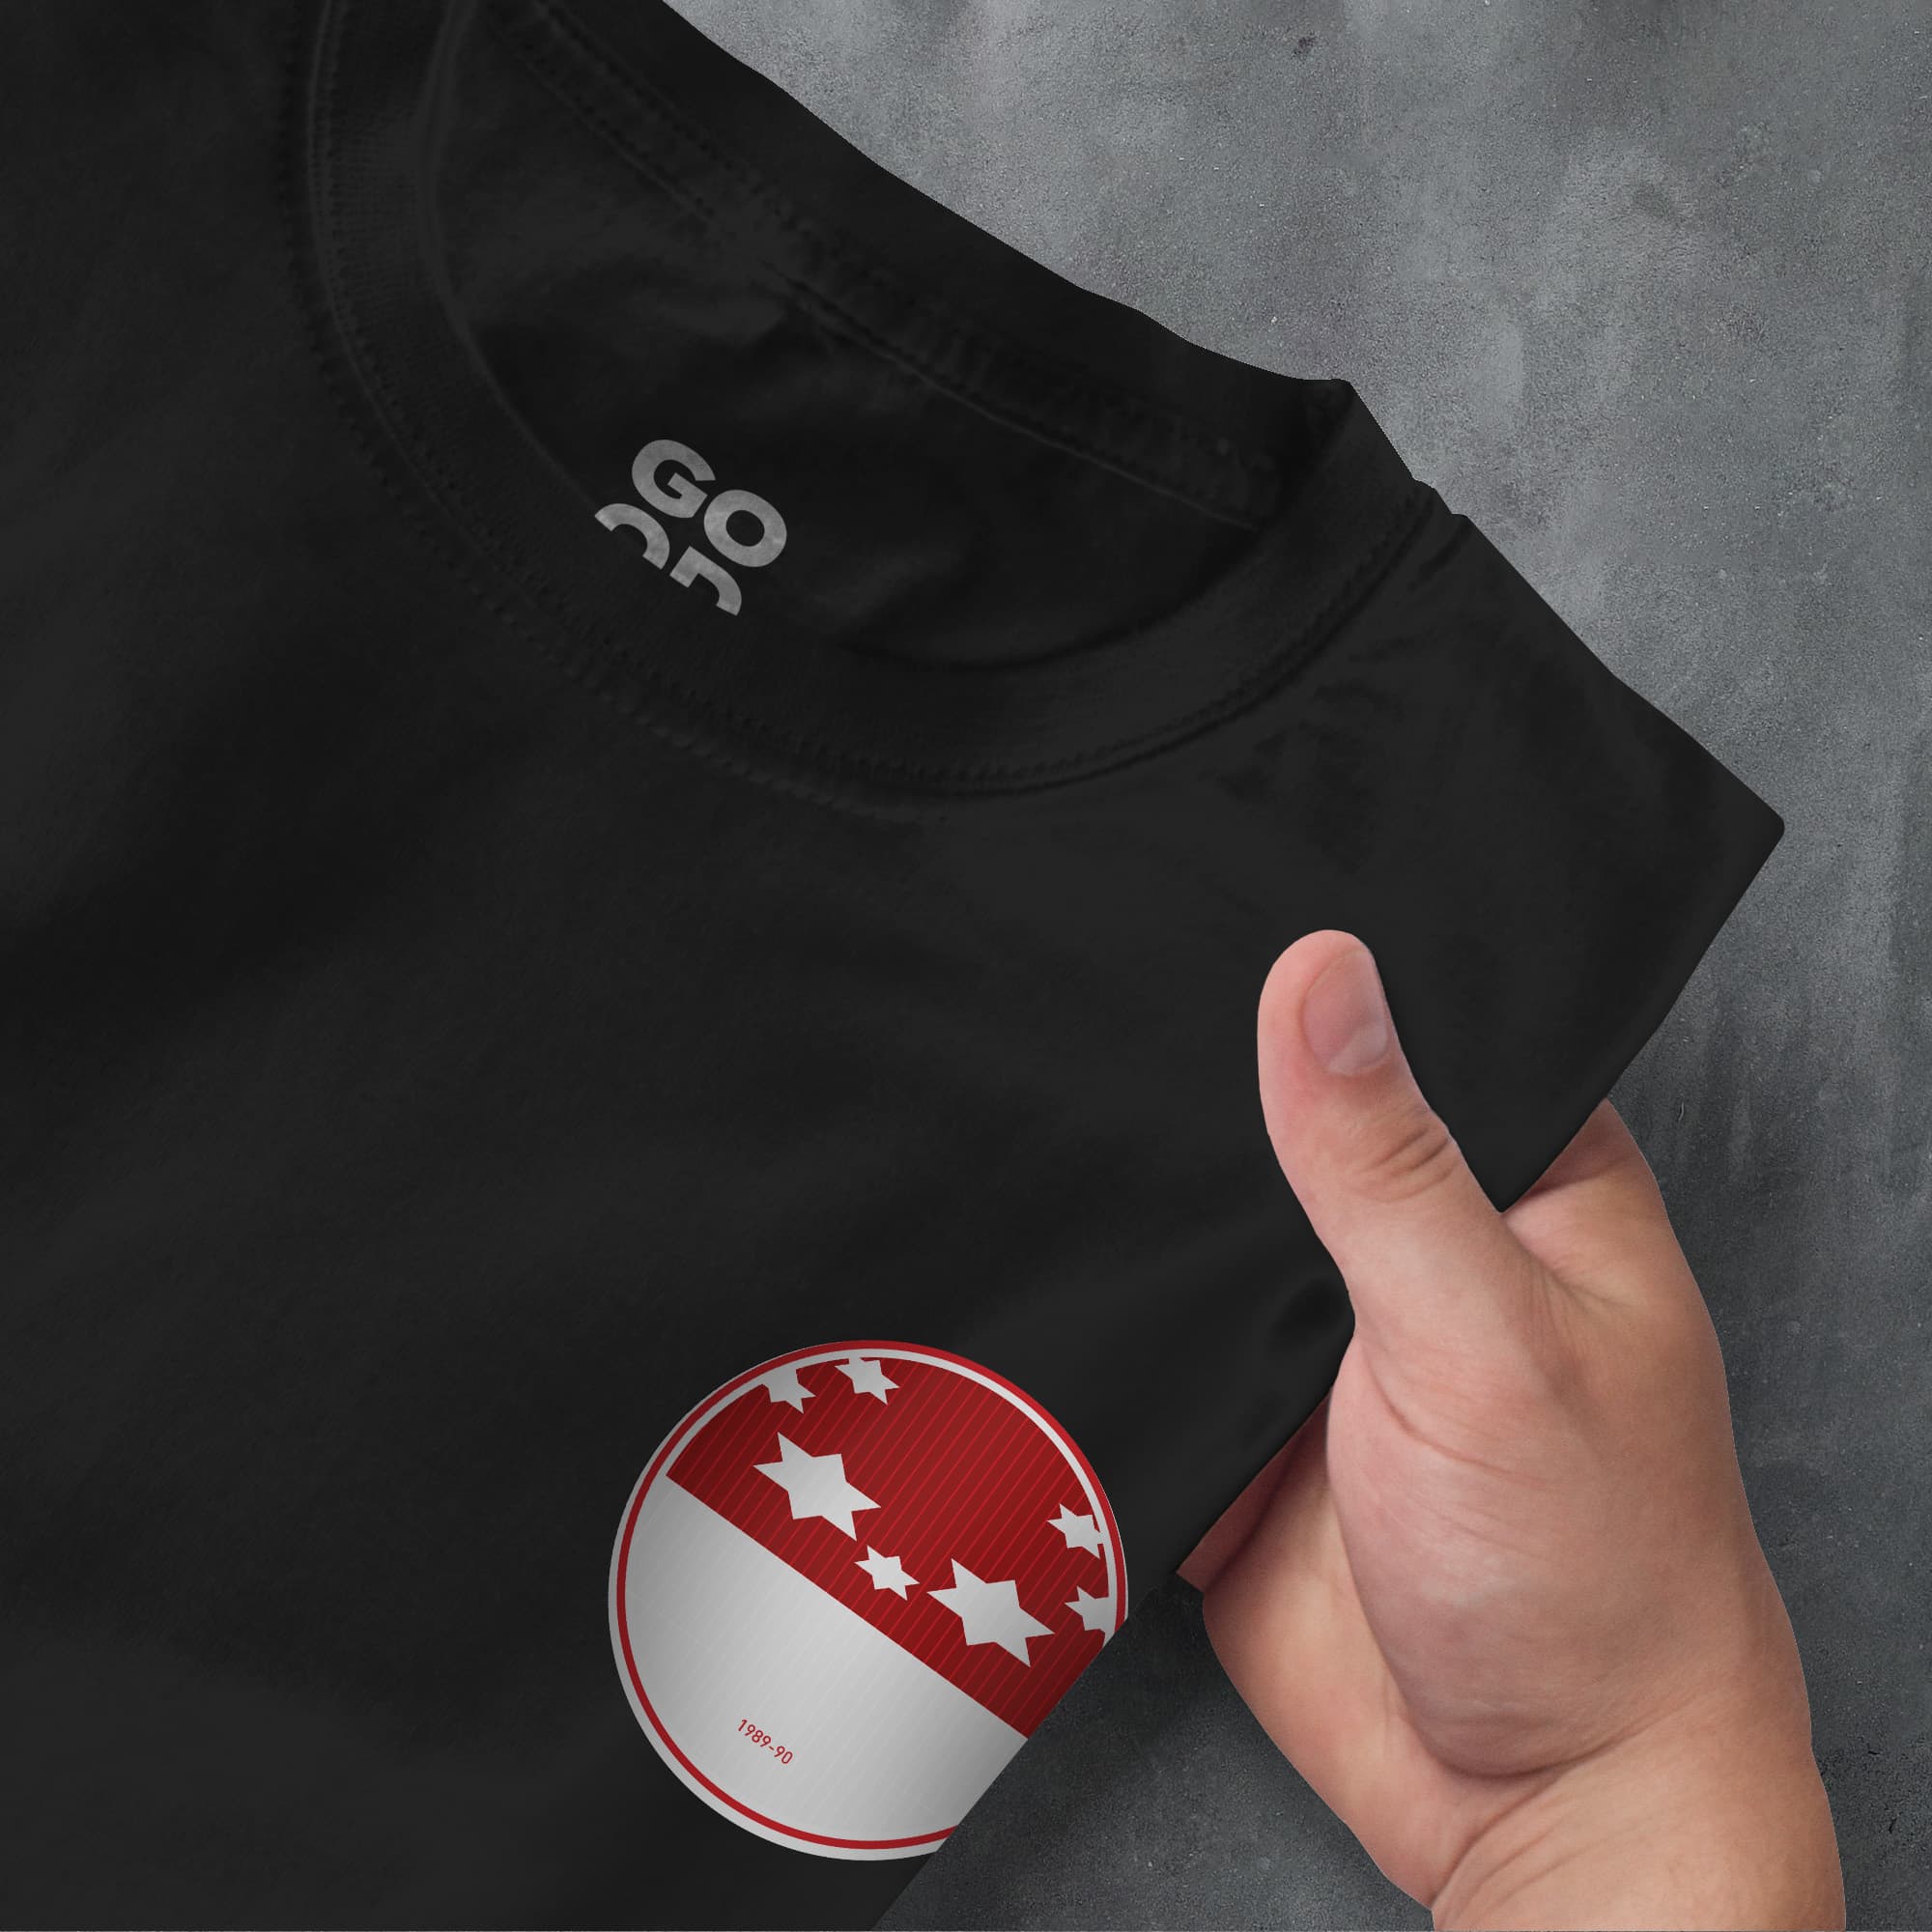 a person is holding a red and white button